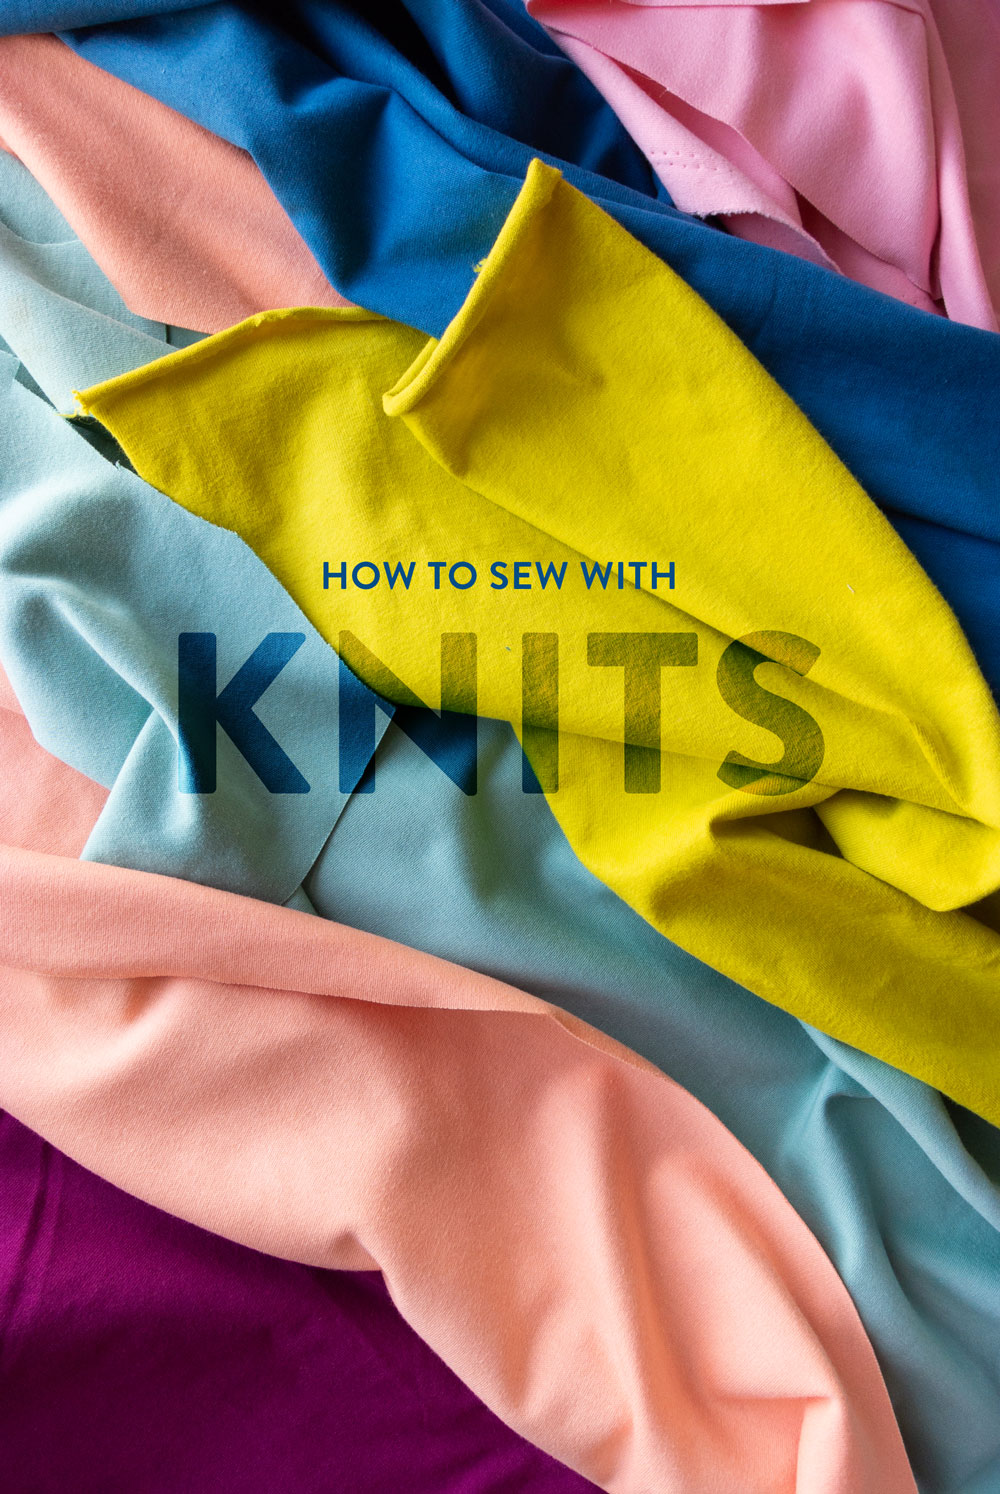 Quilting with knits is not hard, there are just some tricks and tips to know. Learn all about how to sew with knits and what the differences are between jersey knit and interlock knit.